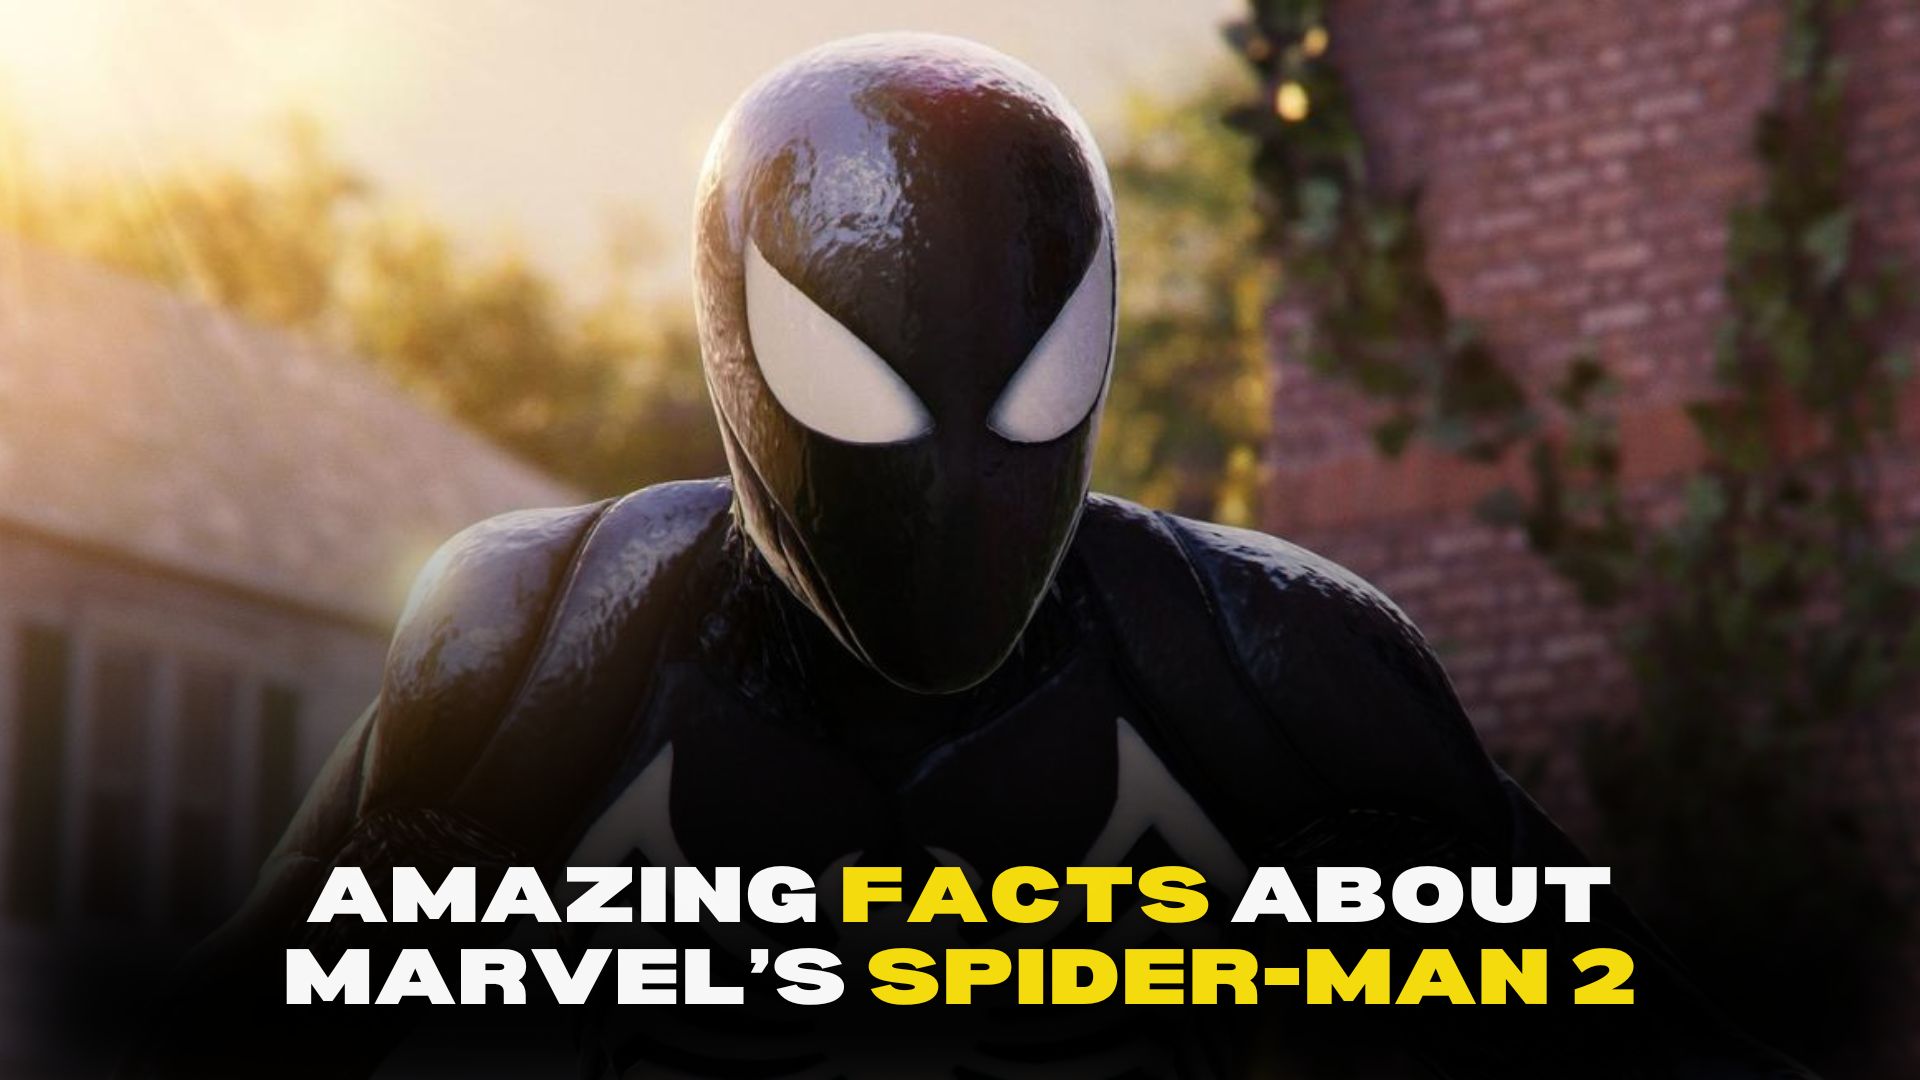 11 Facts About Marvel’s Spider-Man 2 Game